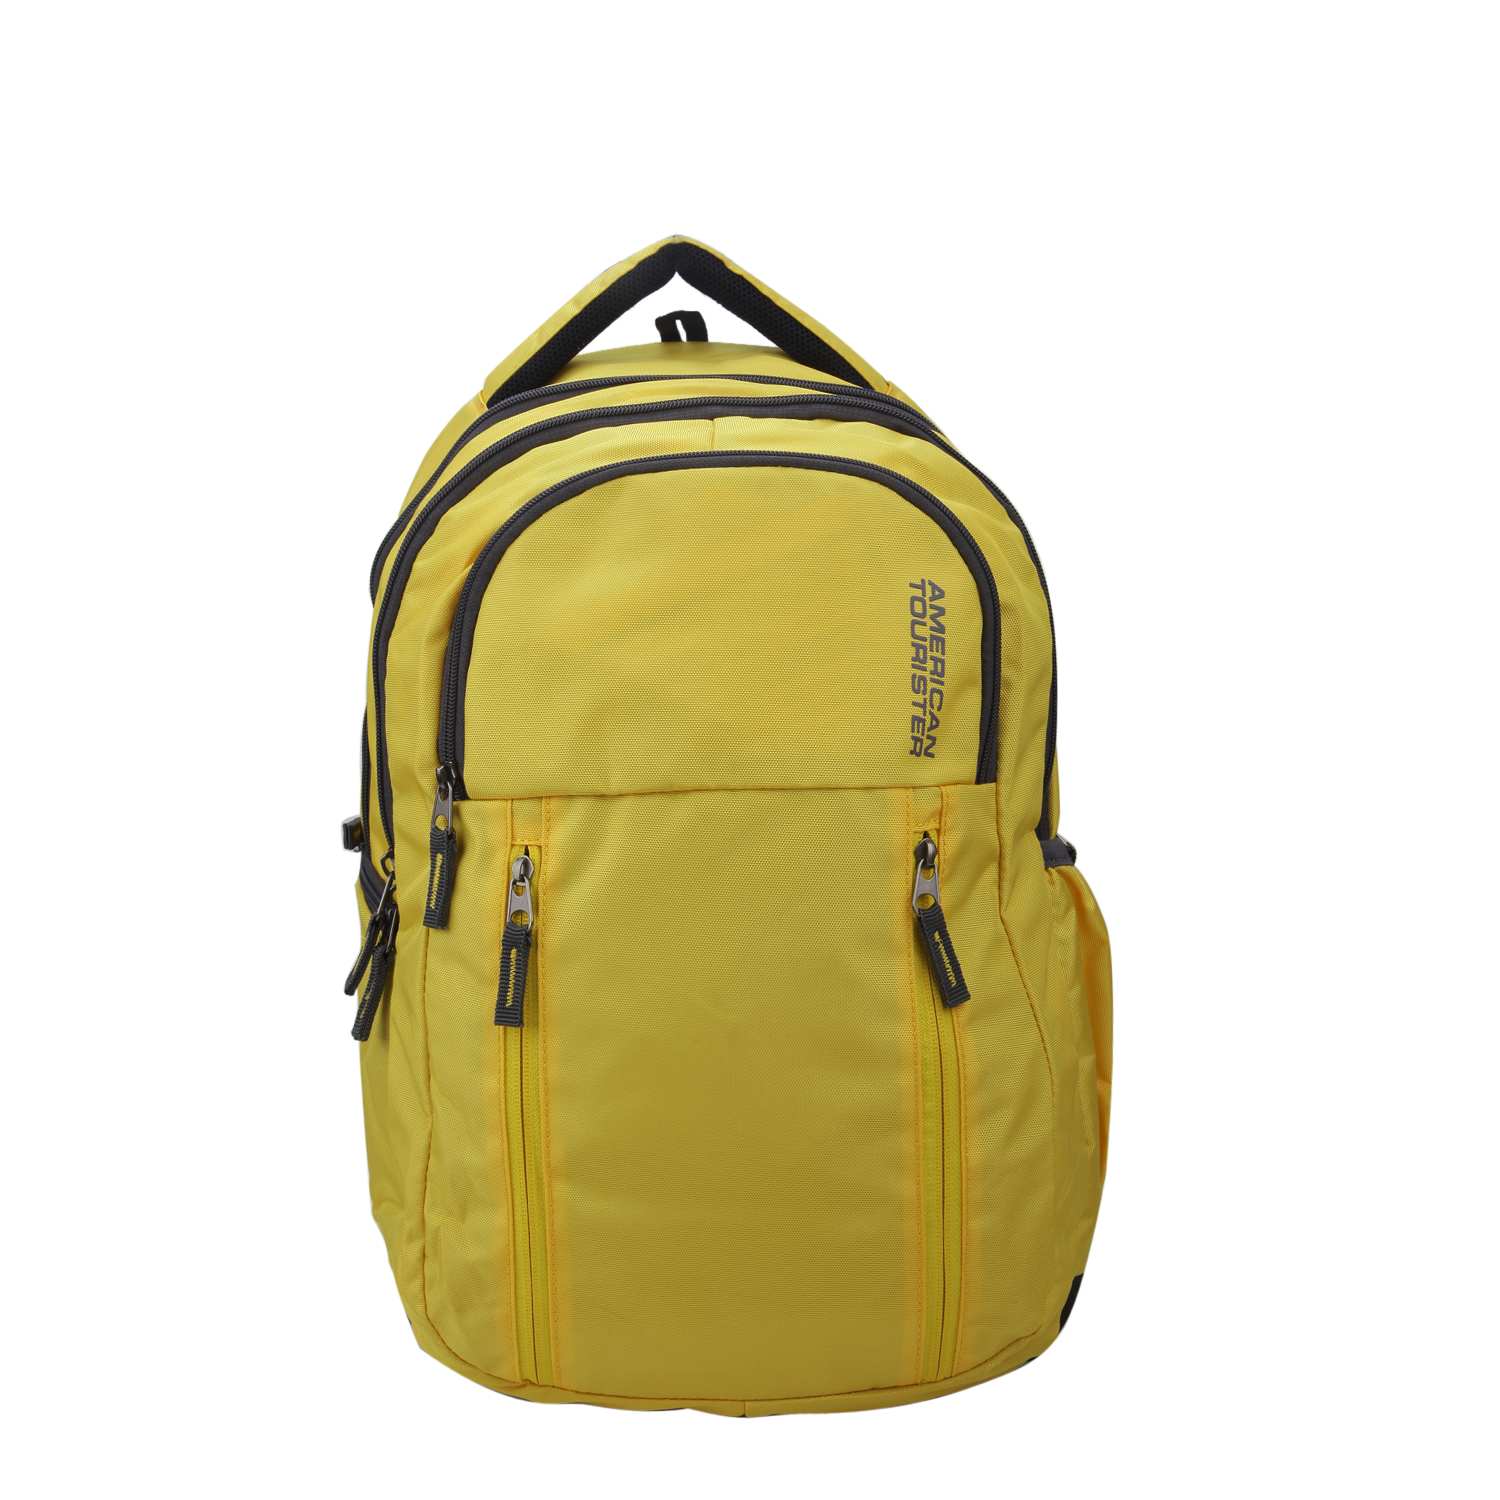 Buy American Tourister Yellow Casual Polyester Backpack Online @ ₹2990 ...